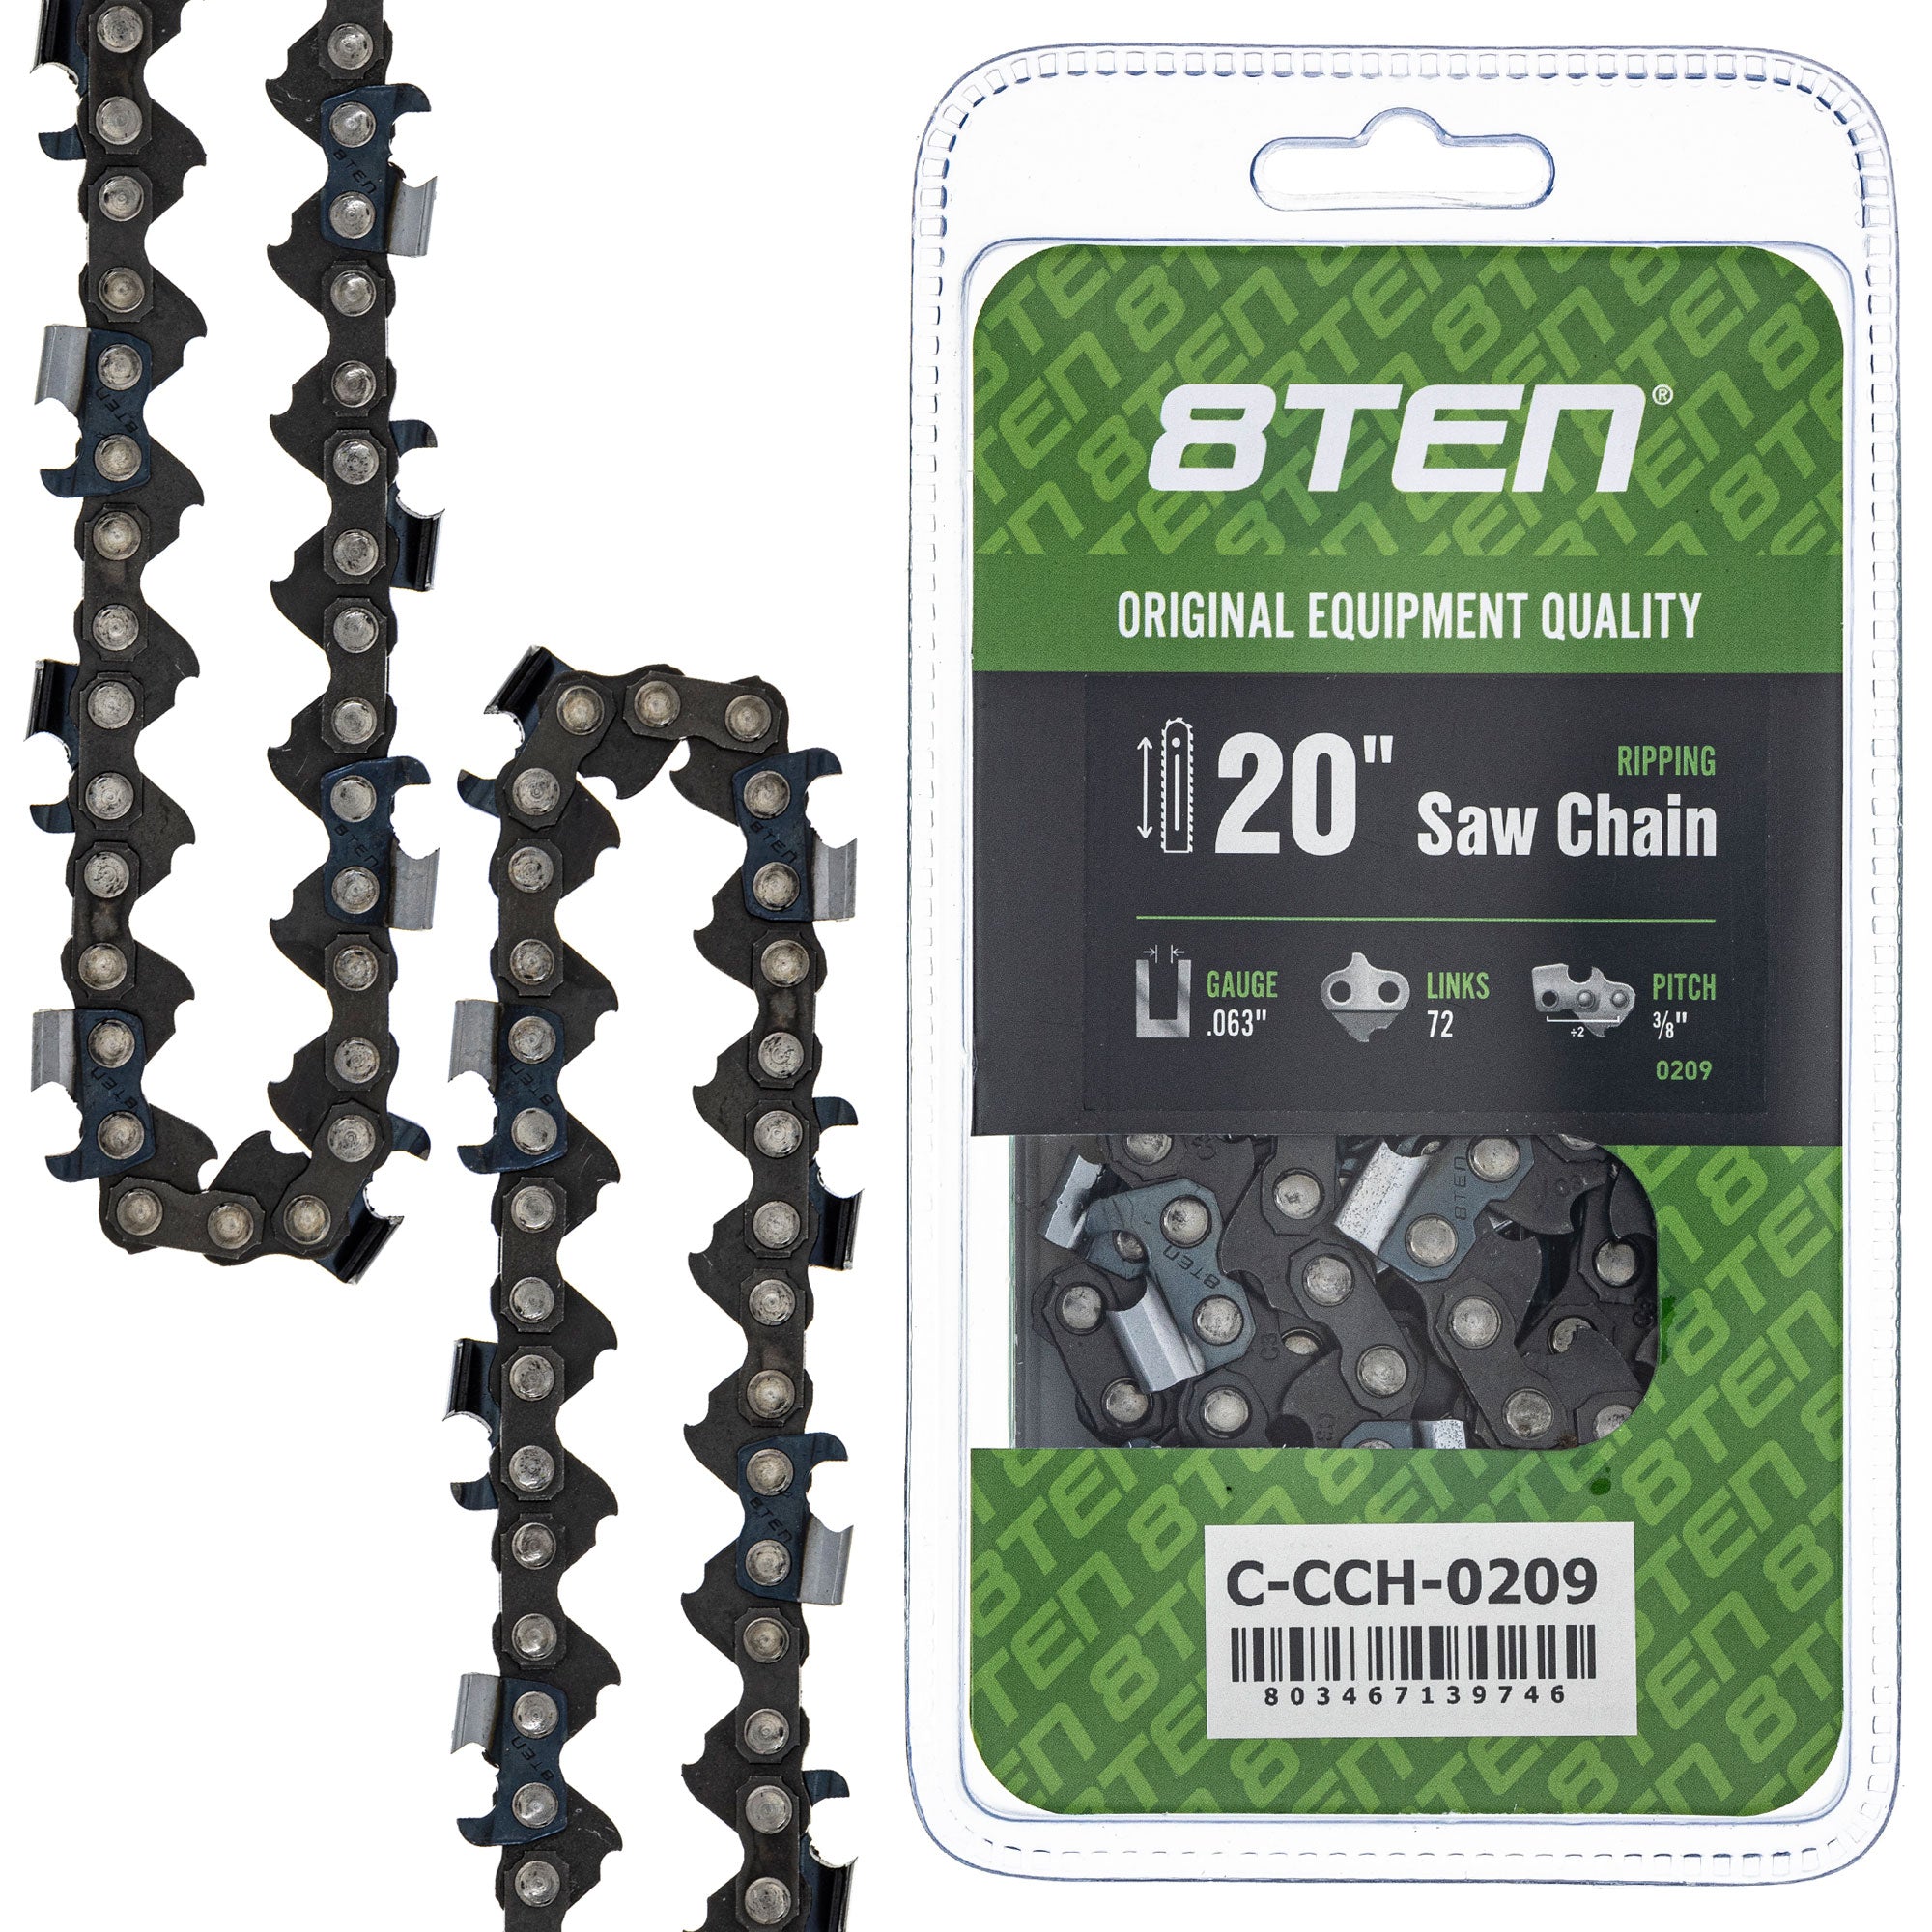 8TEN MK1010455 Guide Bar & Chain for MSE MS E 066